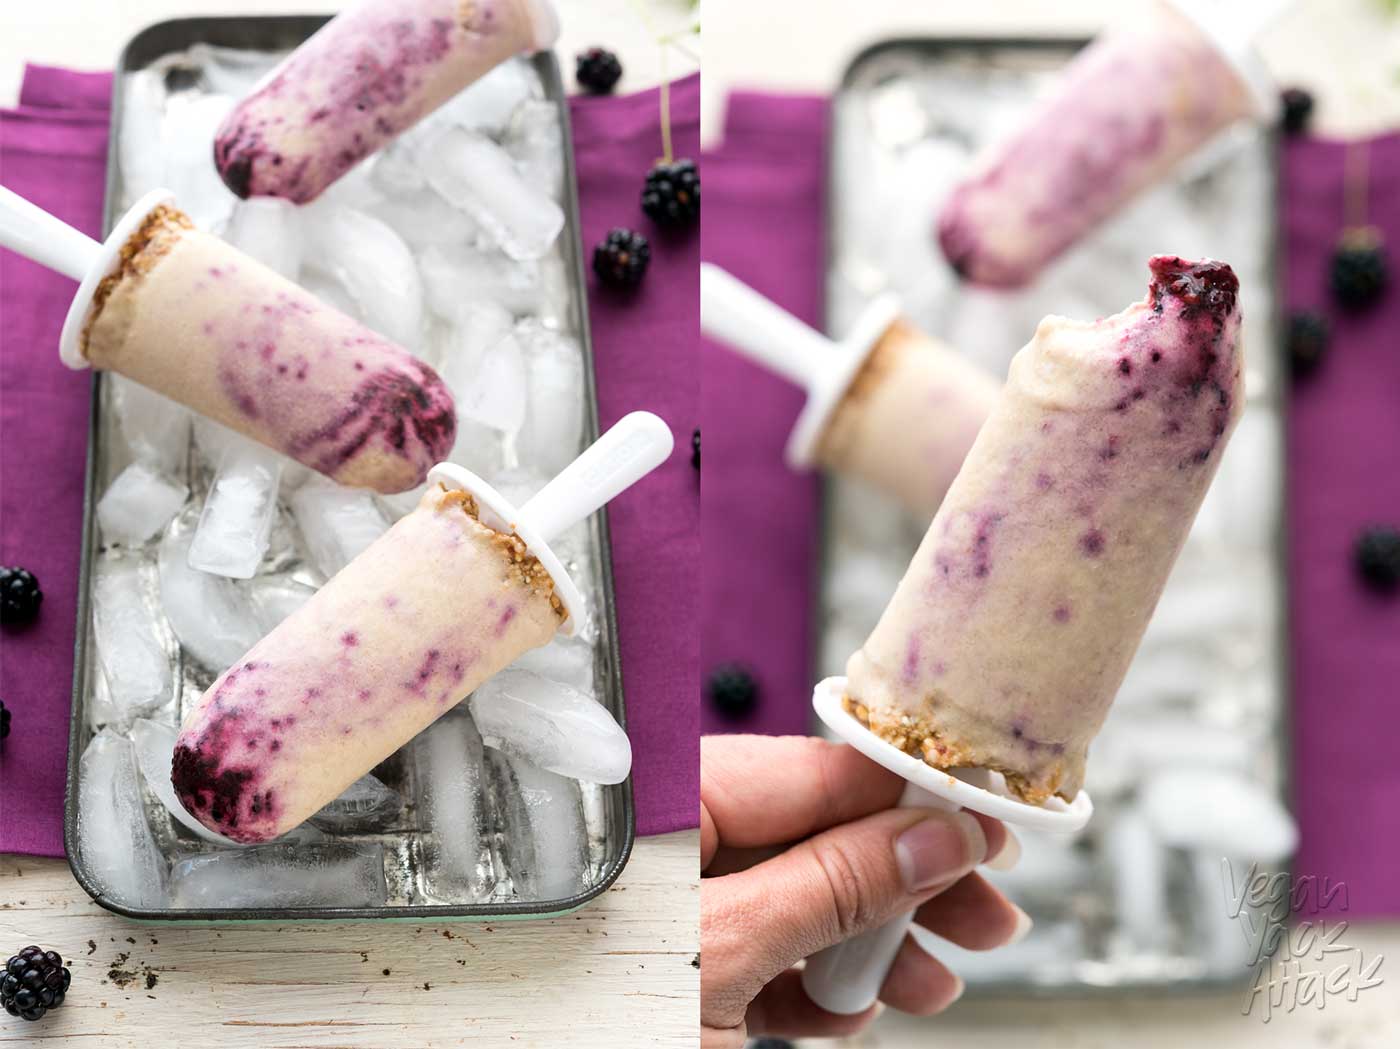 Allergy-friendly, low-fat, Blackberry Cheesecake Popsicles! Oh, and did I mention they’re vegan and SUPER delicious? #veganyackattack #glutenfree #soyfree #nutfree #oilfree